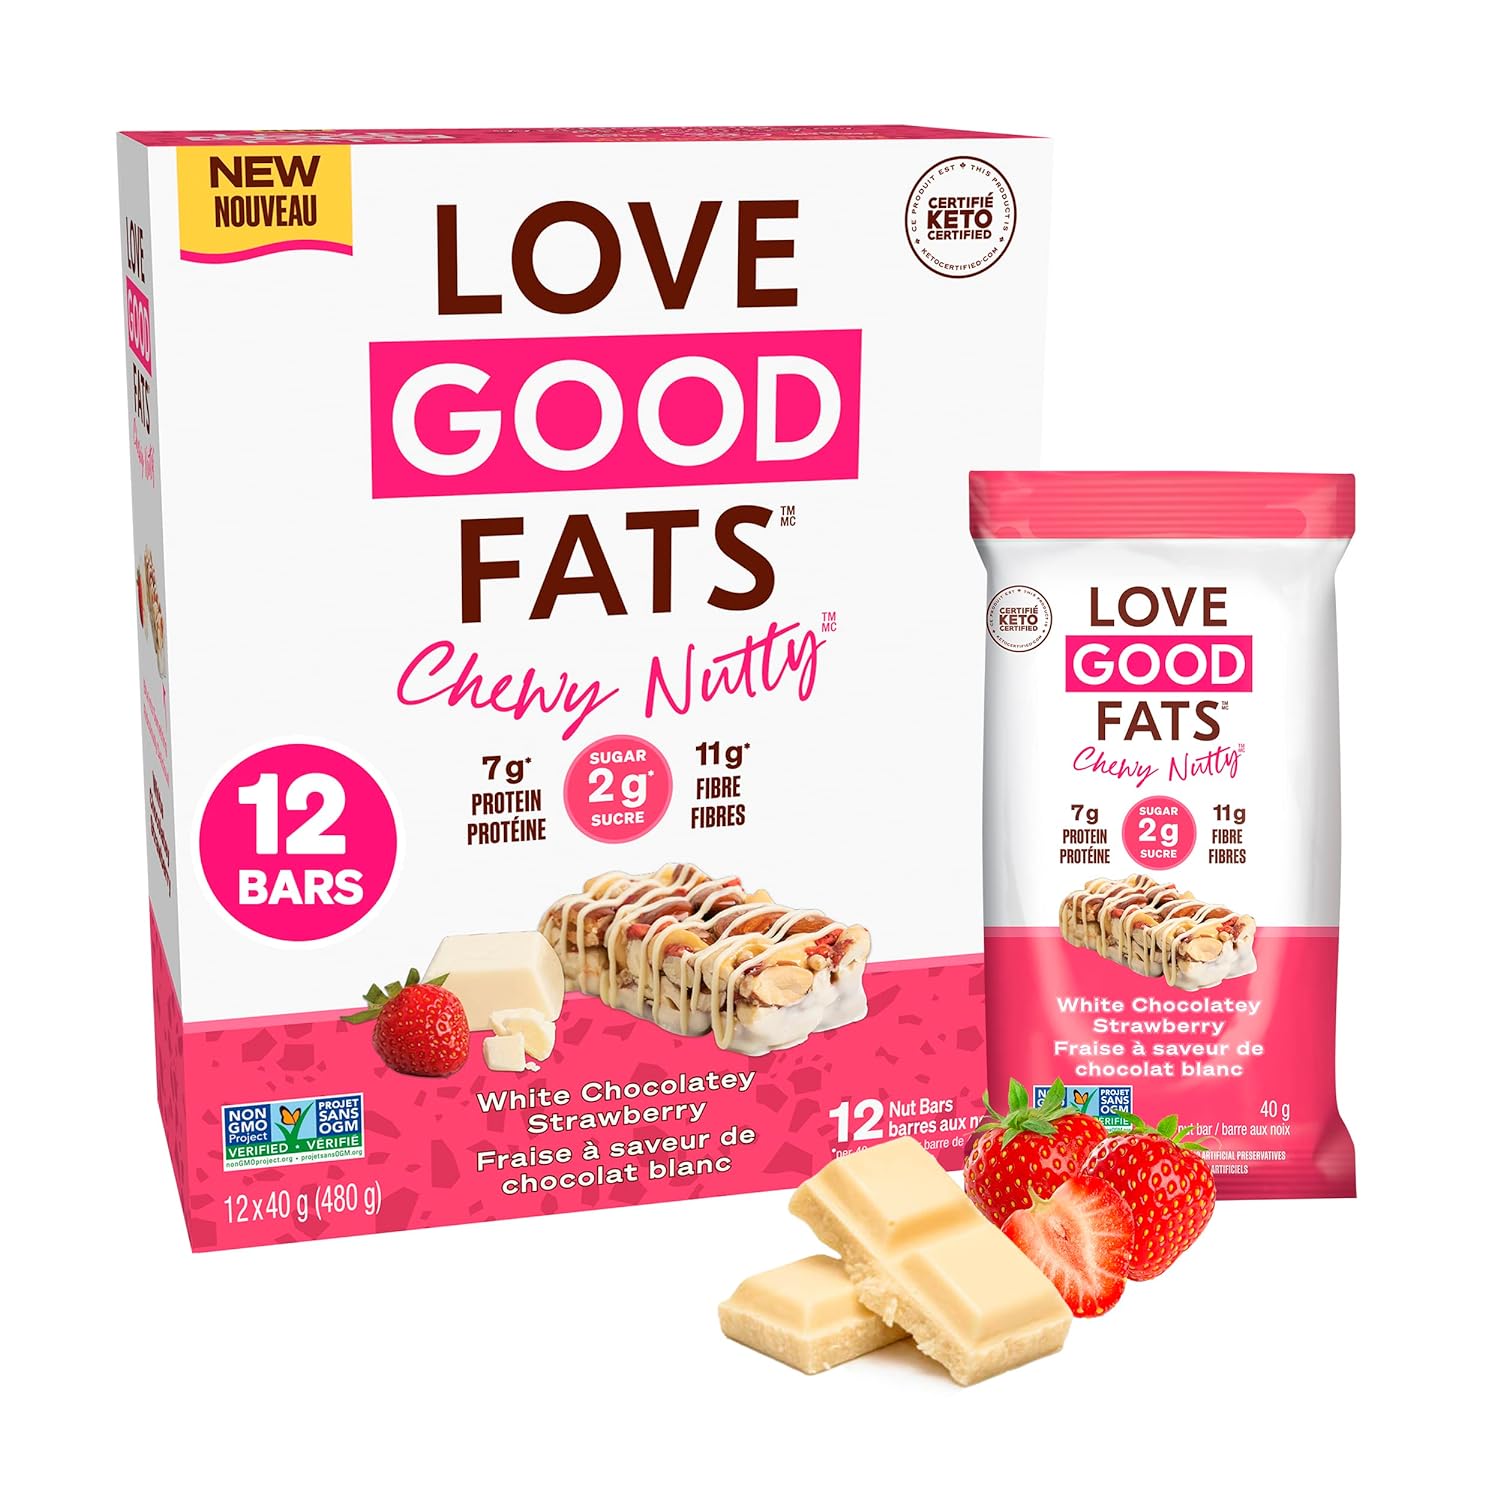 Love Good Fats Chewy Nutty White Chocolatey Strawberry Keto Bars - Low Carb Protein Snacks - 12 pack (1.59oz / 45g each bar)